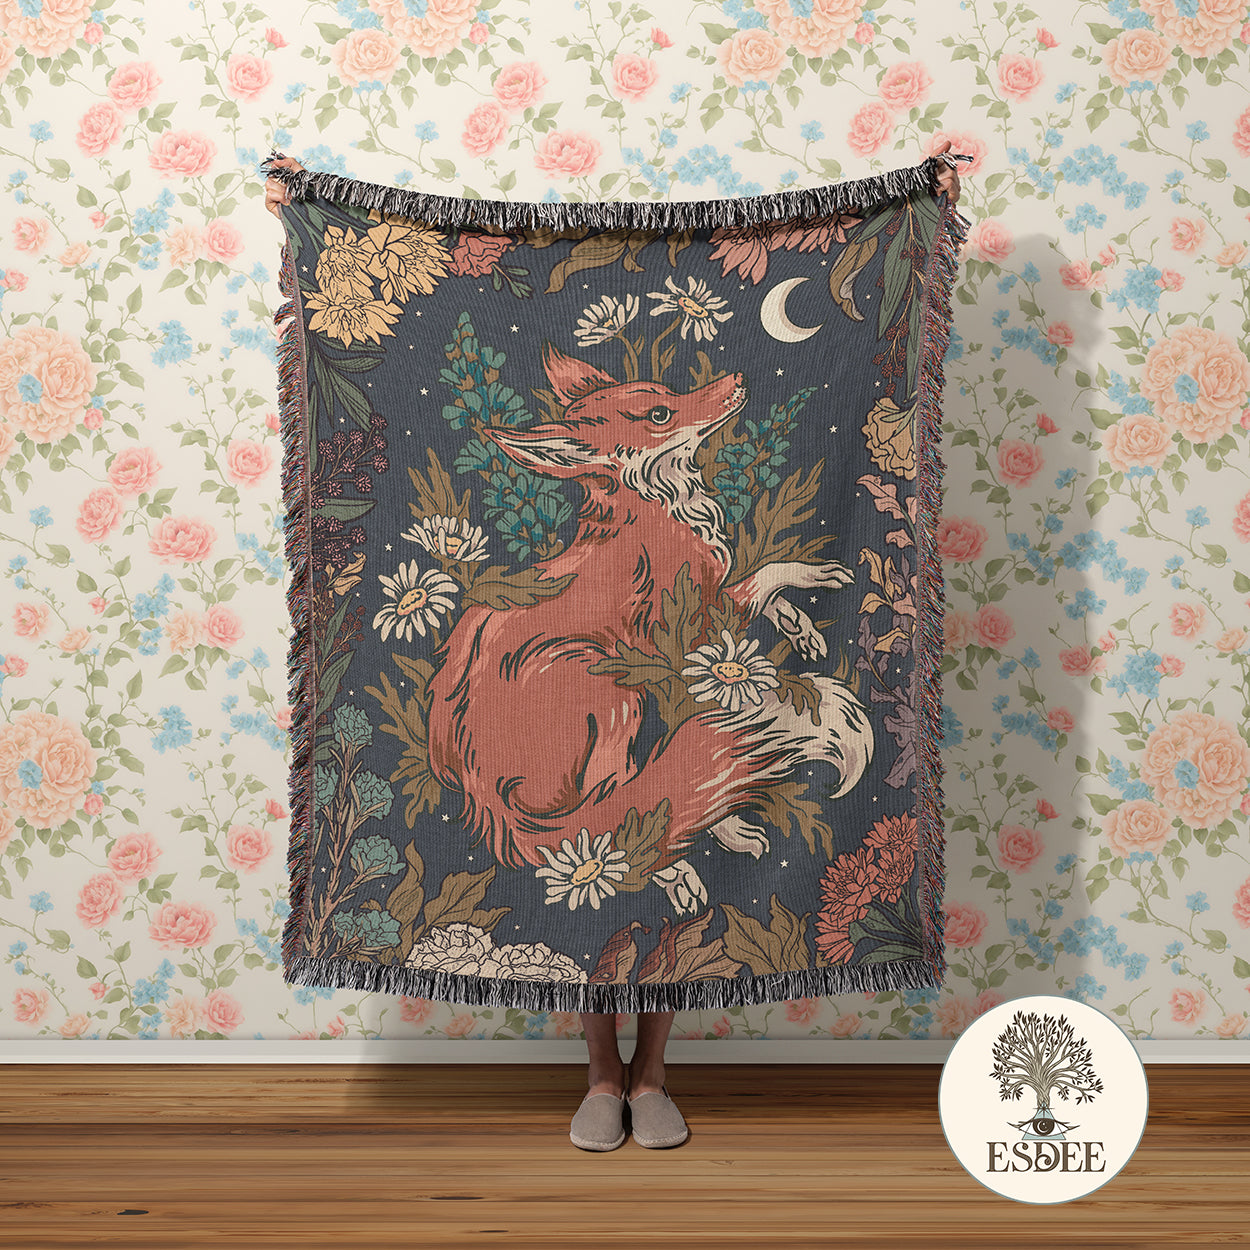 Forestcore Fox Cotton Woven Throw Blanket Wall Hanging - Esdee